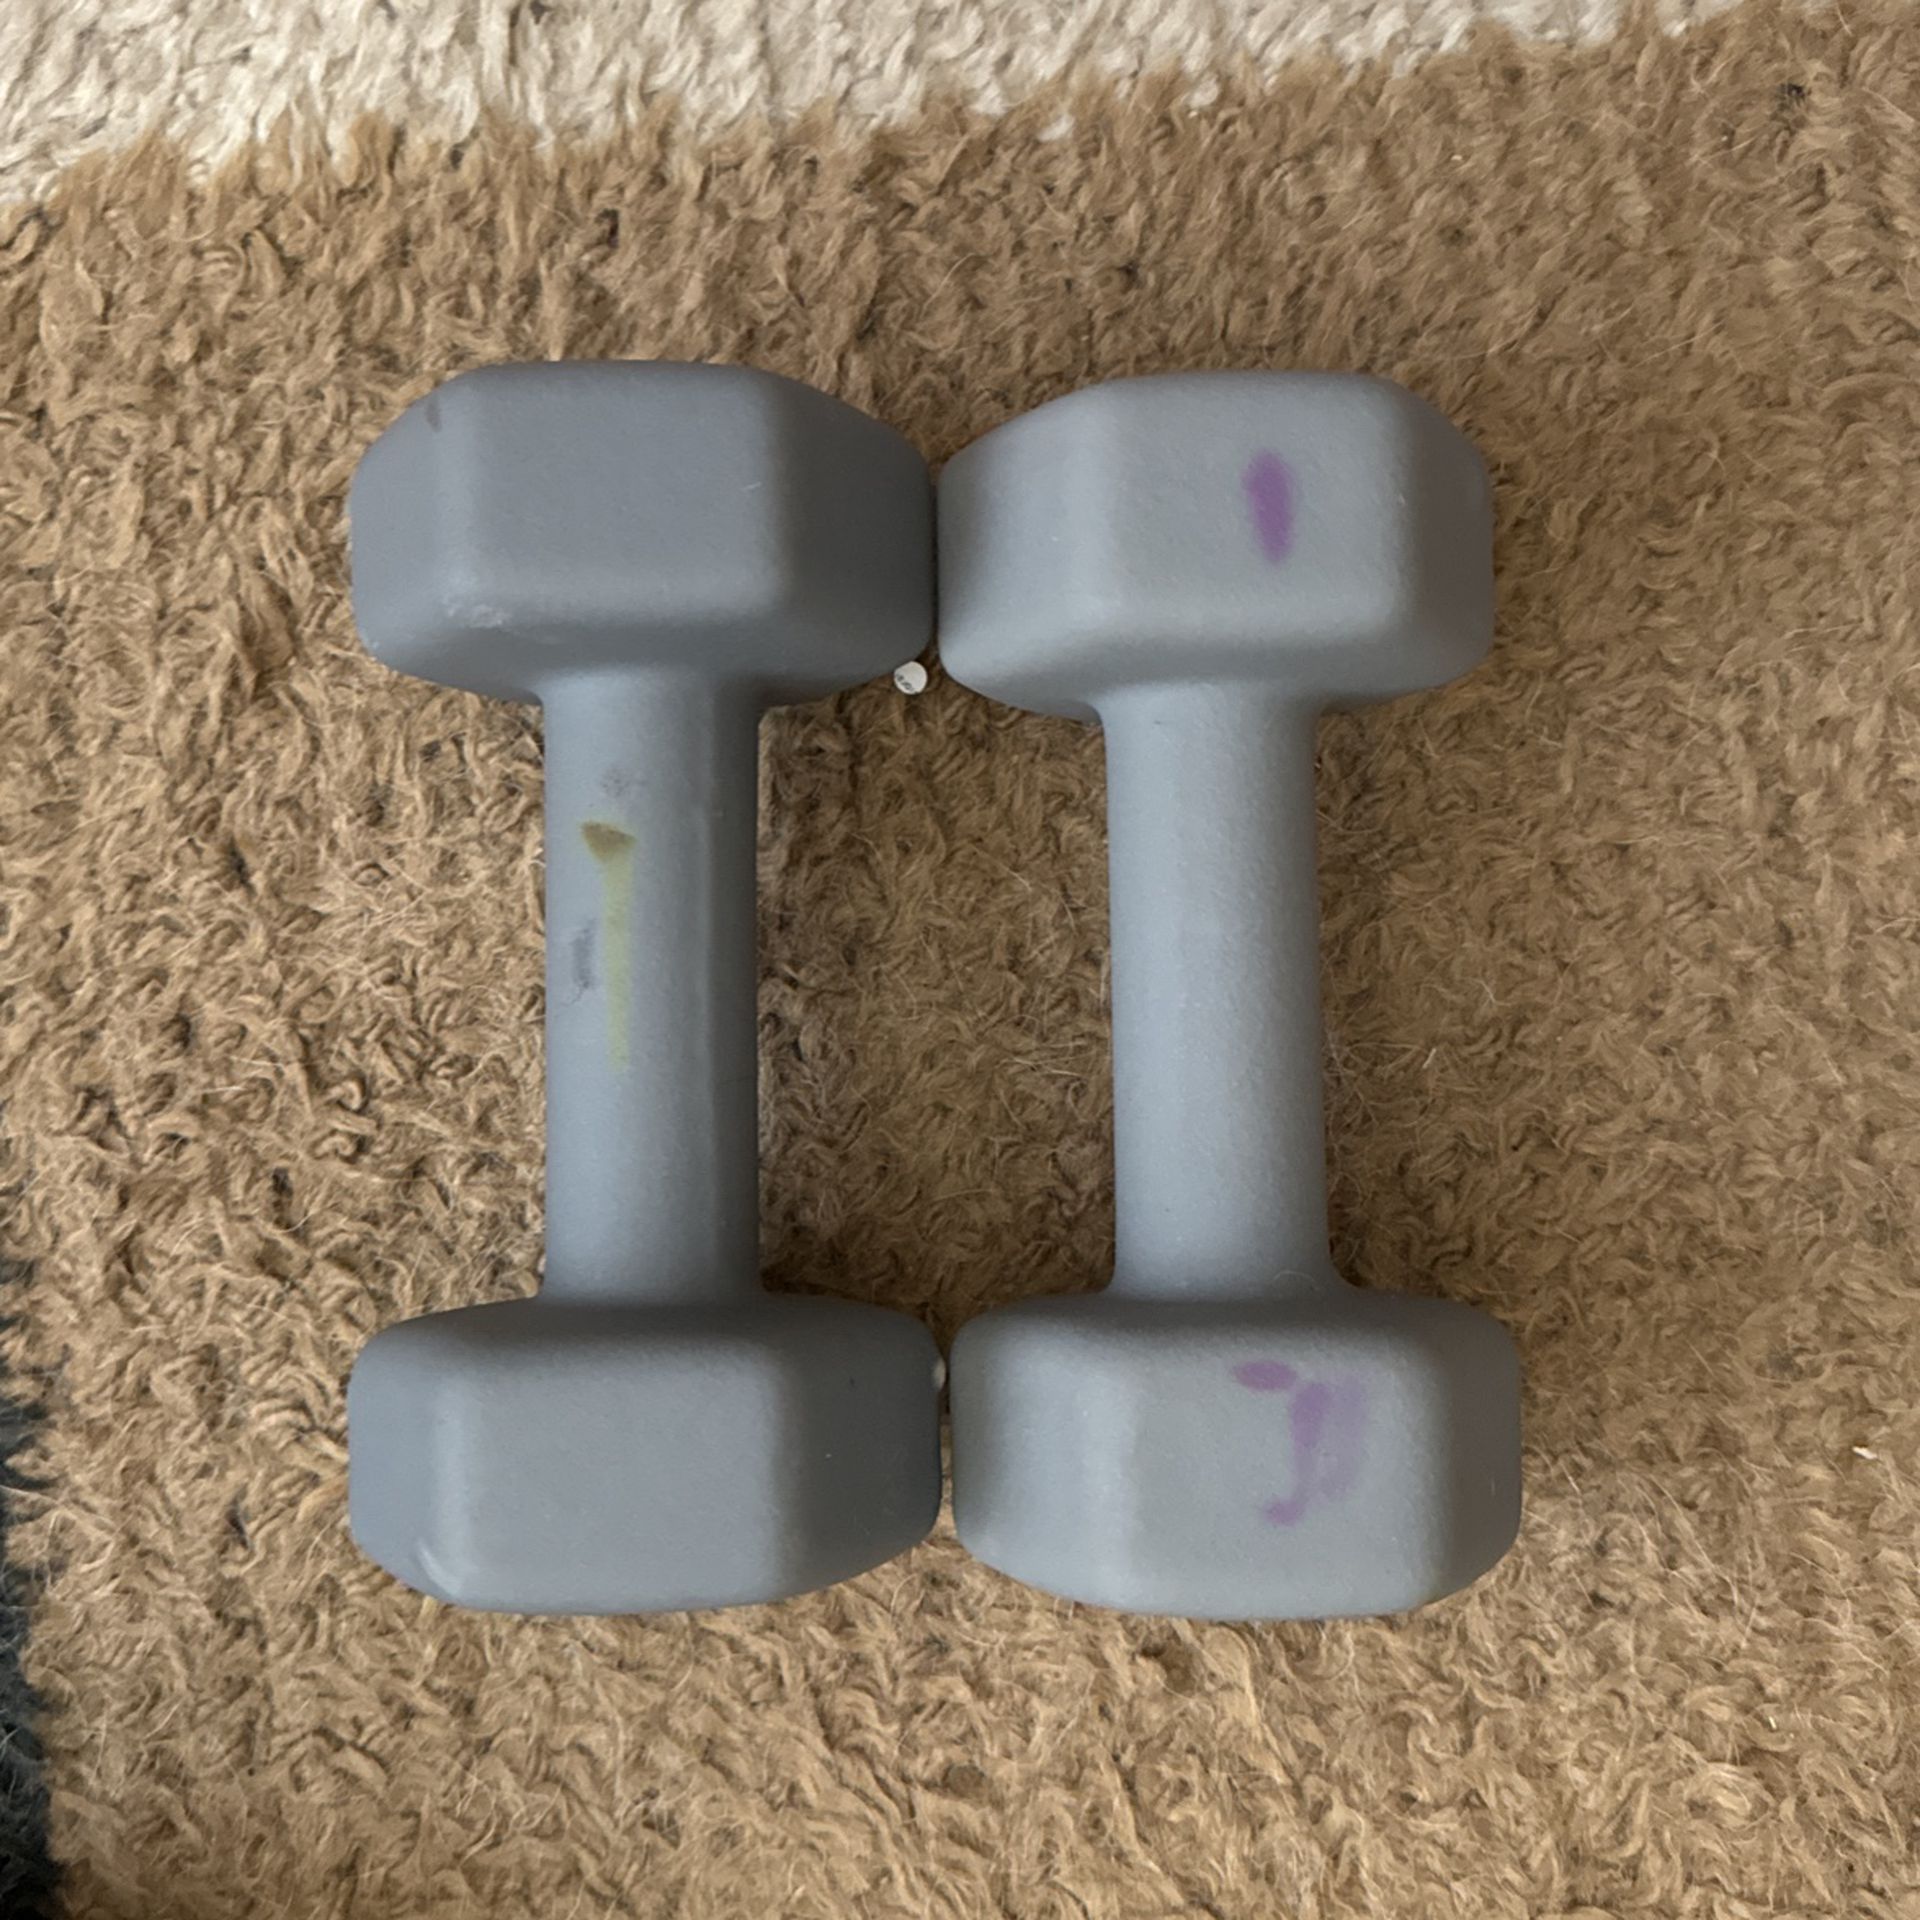 12lb Hand Weights